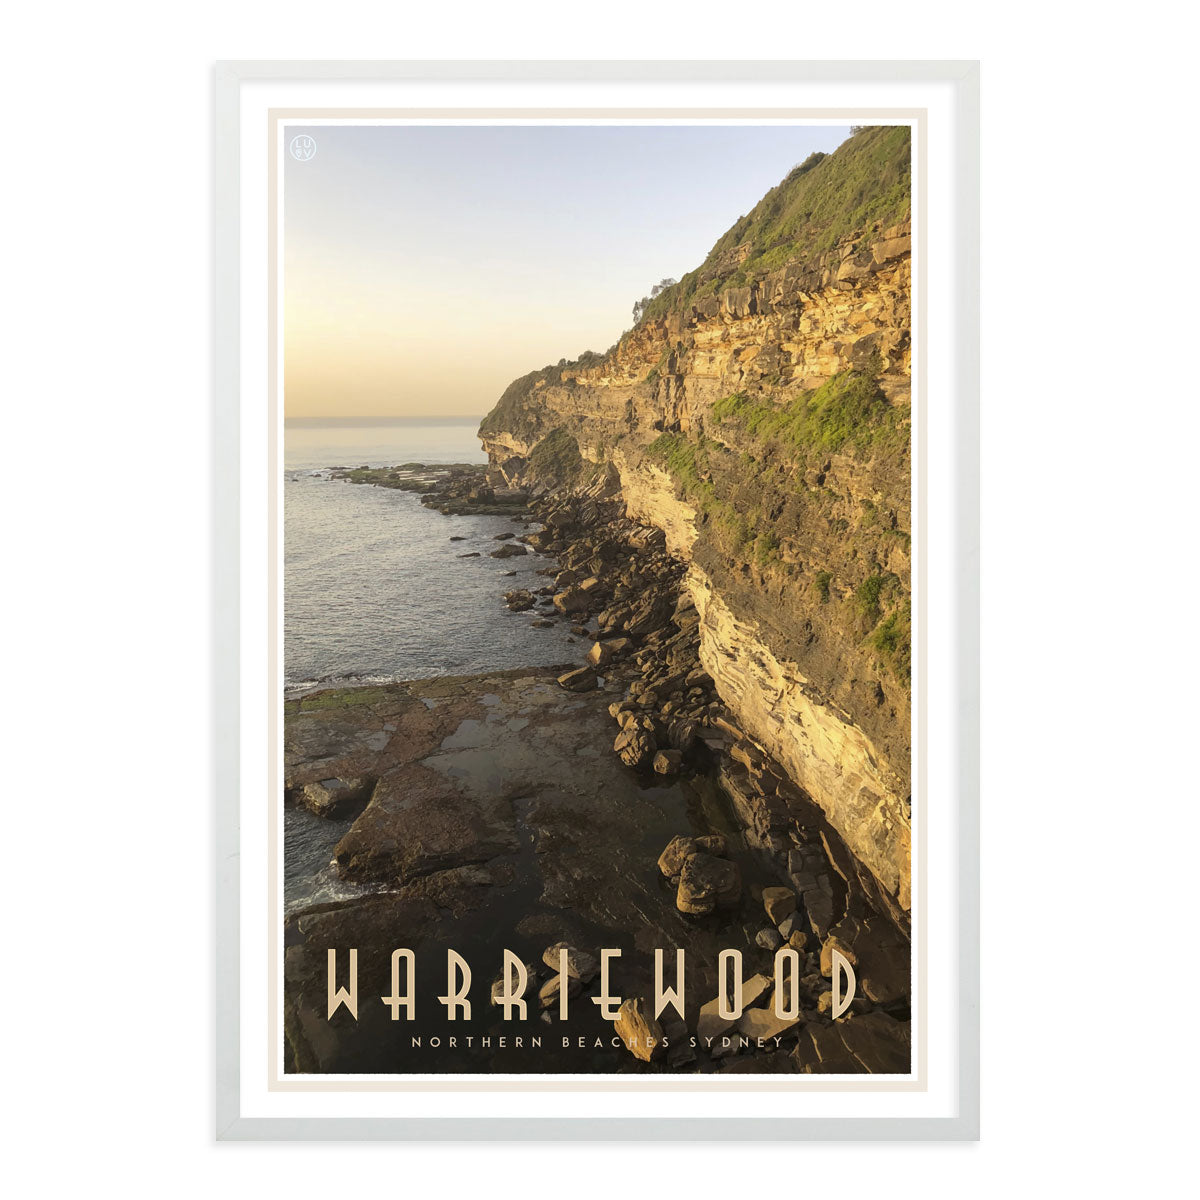 Warriewood vintage travel style poster designed by places we luv